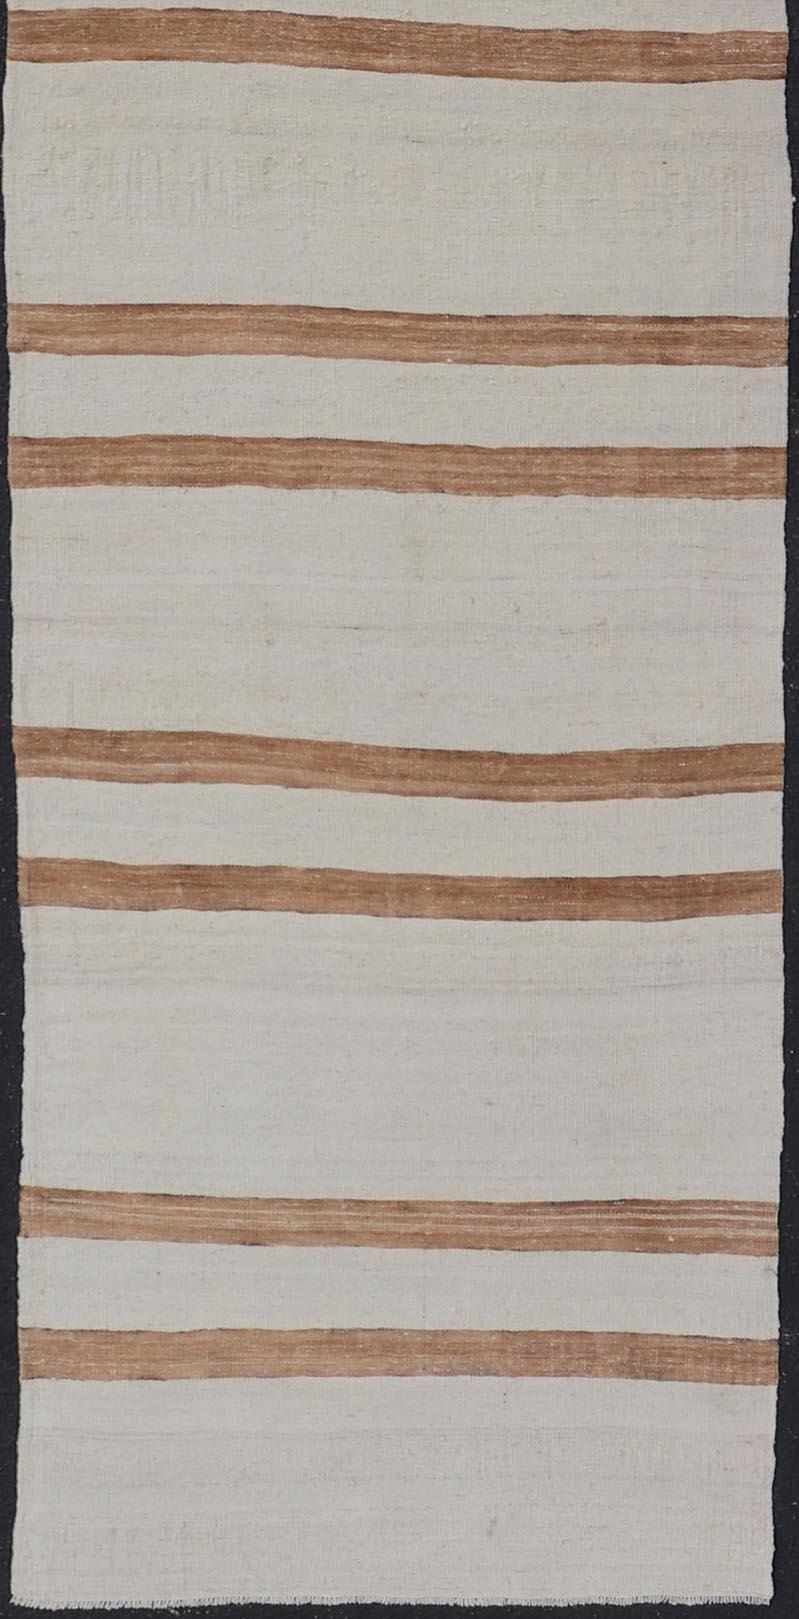 Hand-Woven Vintage Turkish Kilim Runner with Horizontal Stripes in Ivory and Cognac For Sale